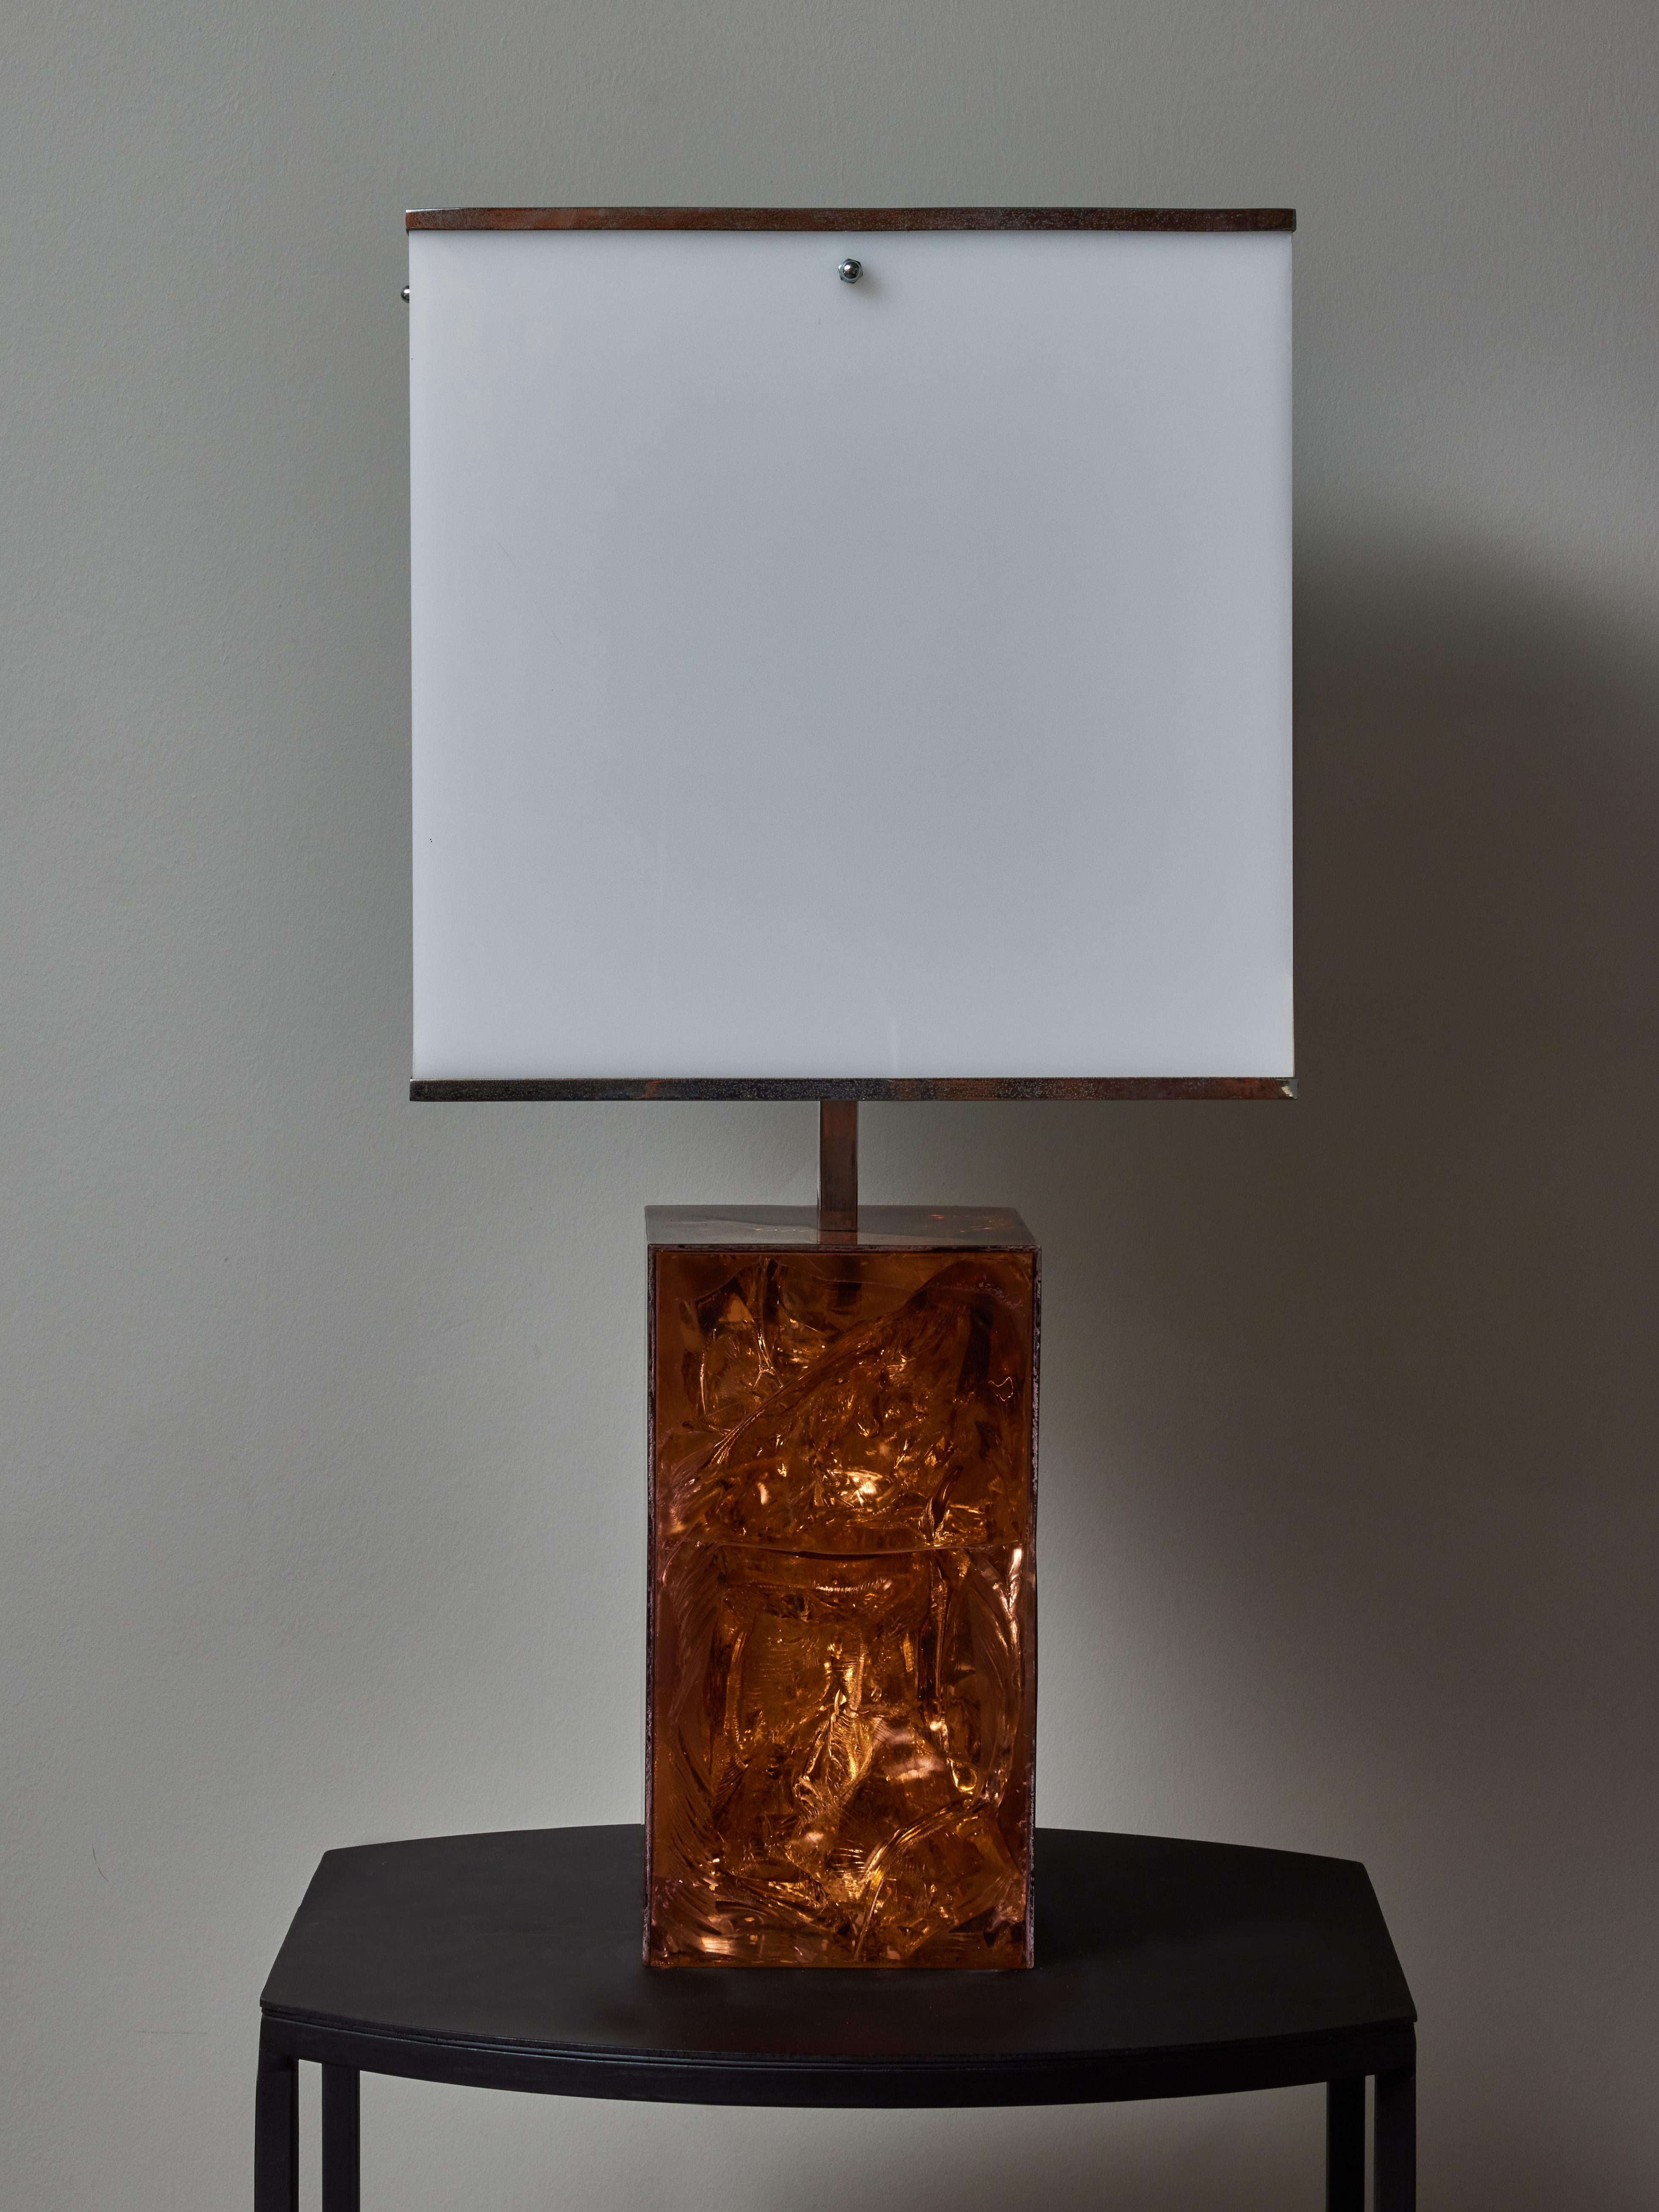 Table lamp made of a rectangular fractal resin foot, aluminium central stem supporting two sources of light and a square white plexi shade.